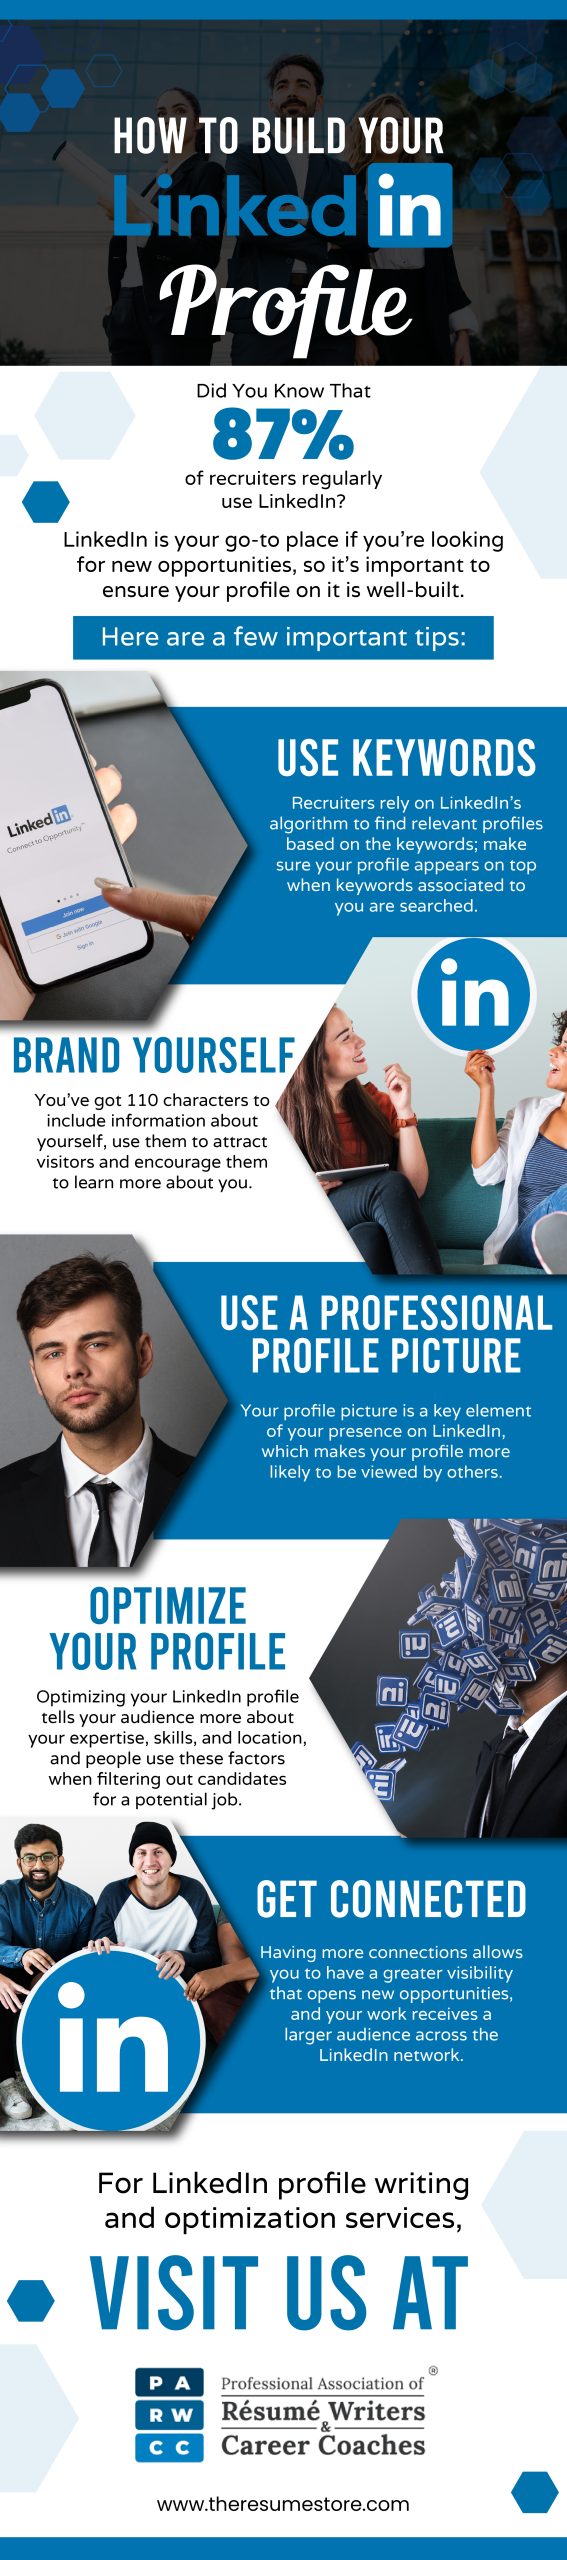 Learn about how to set-up a LinkedIn Profile